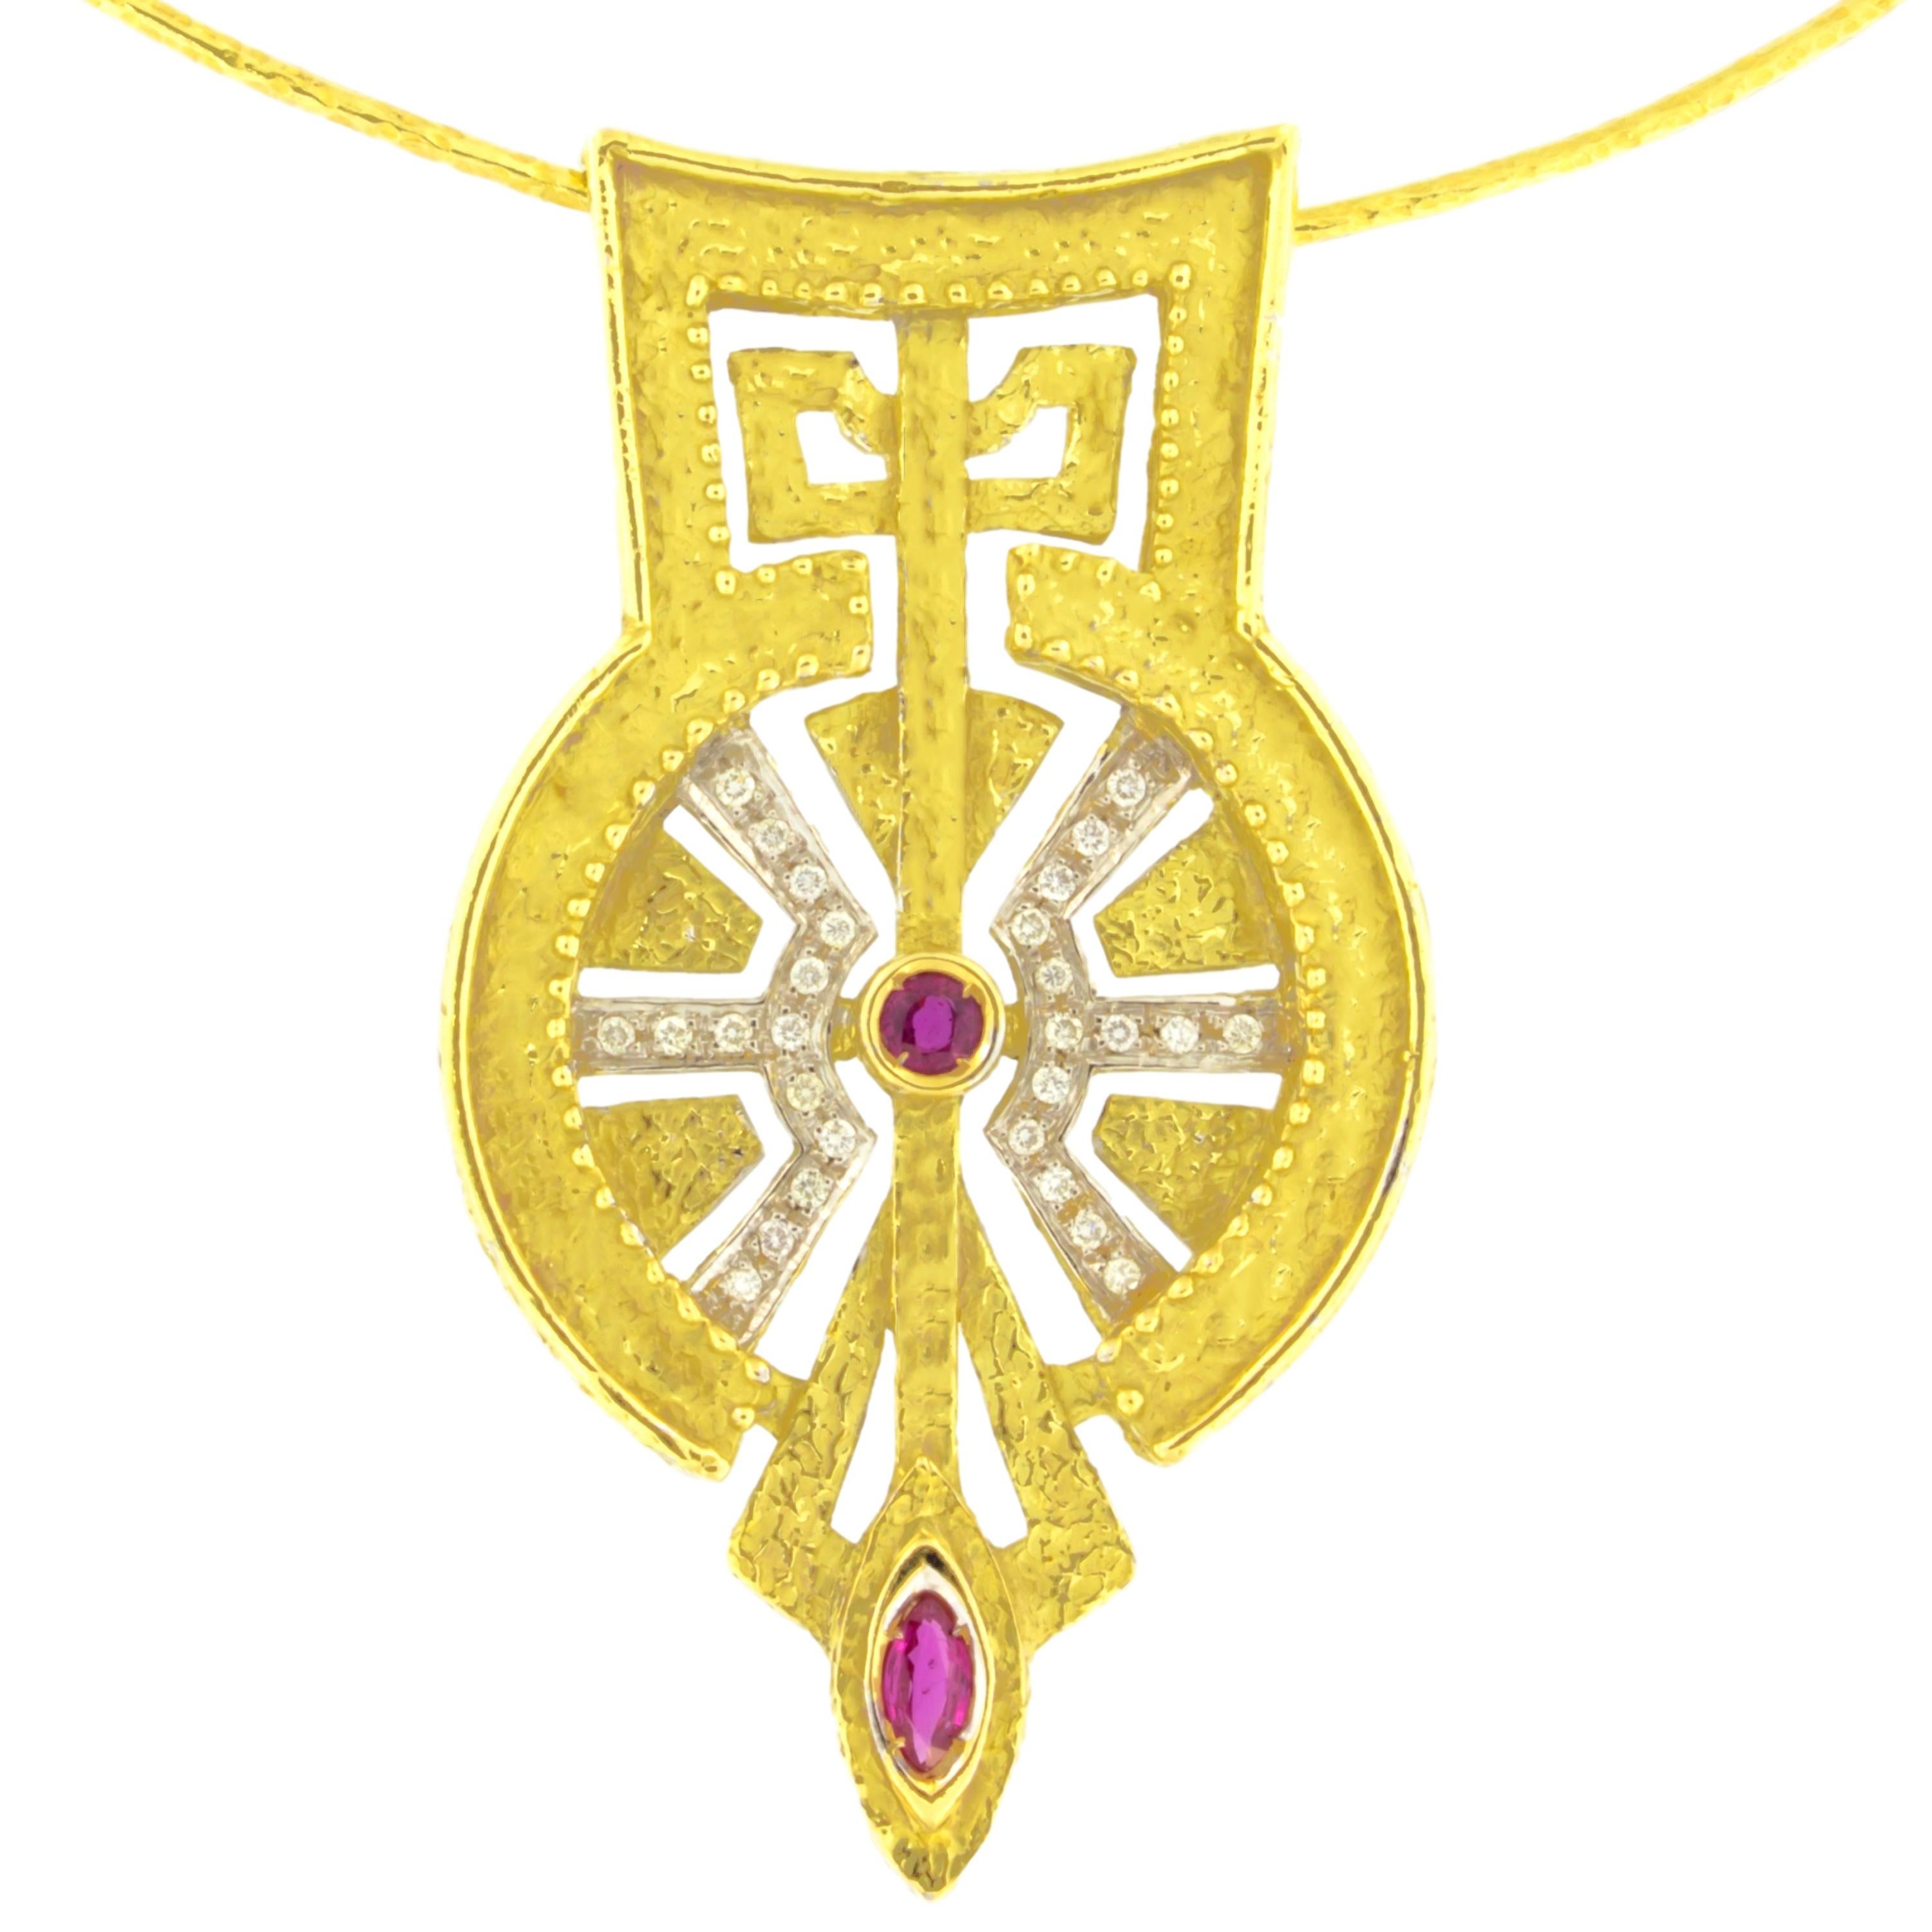 Sacchi "Saint Peter's Square" 18 Karat Yellow Gold Ruby and Diamonds Necklace